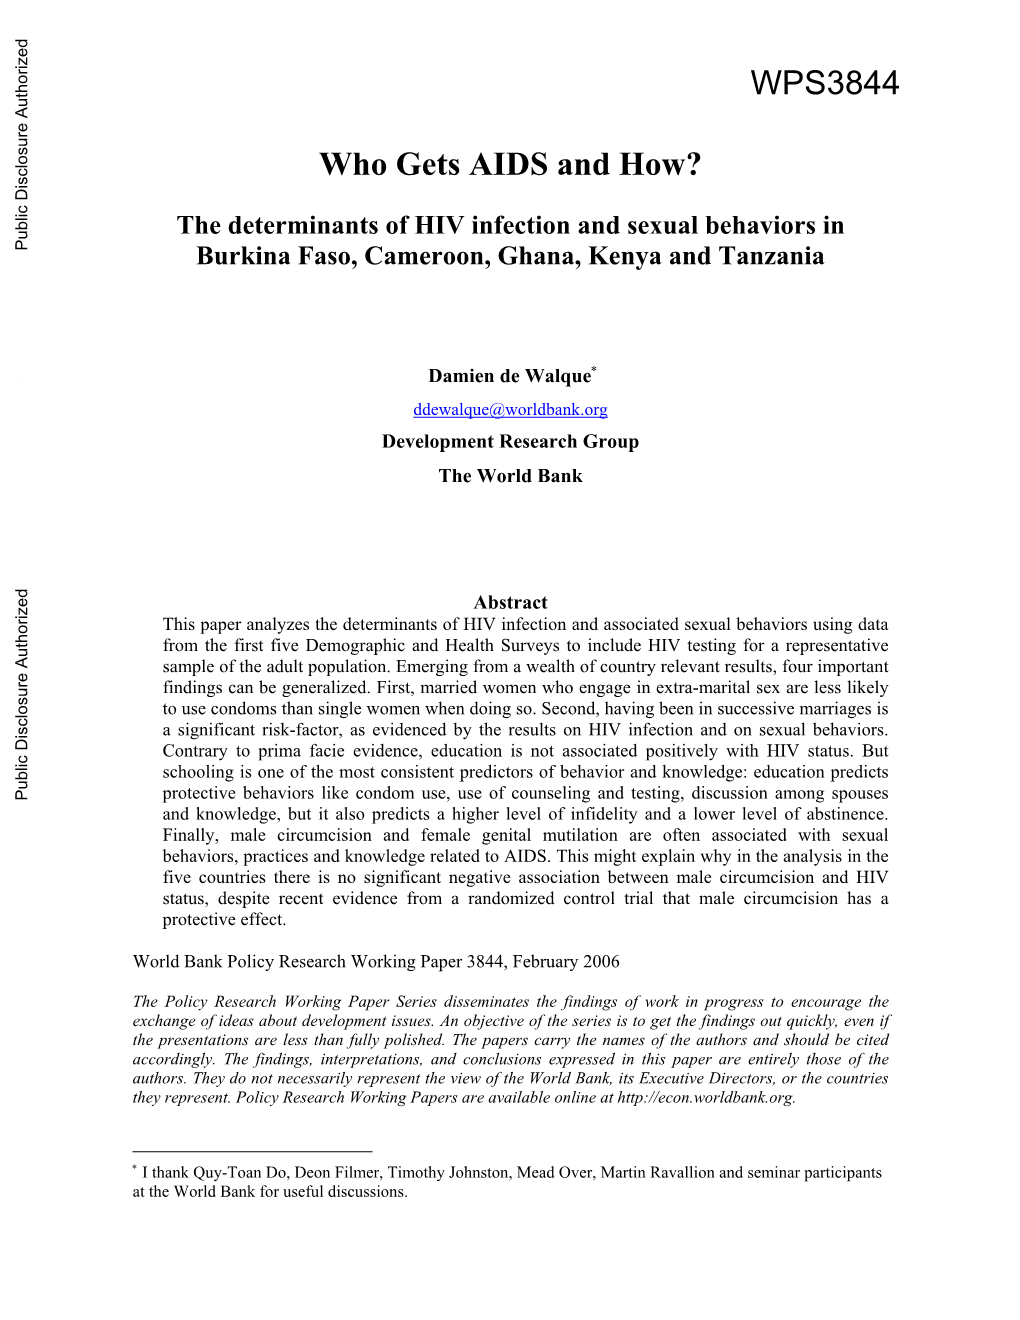 The Determinants of HIV Infection and Sexual Behaviors in Public Disclosure Authorized Burkina Faso, Cameroon, Ghana, Kenya and Tanzania